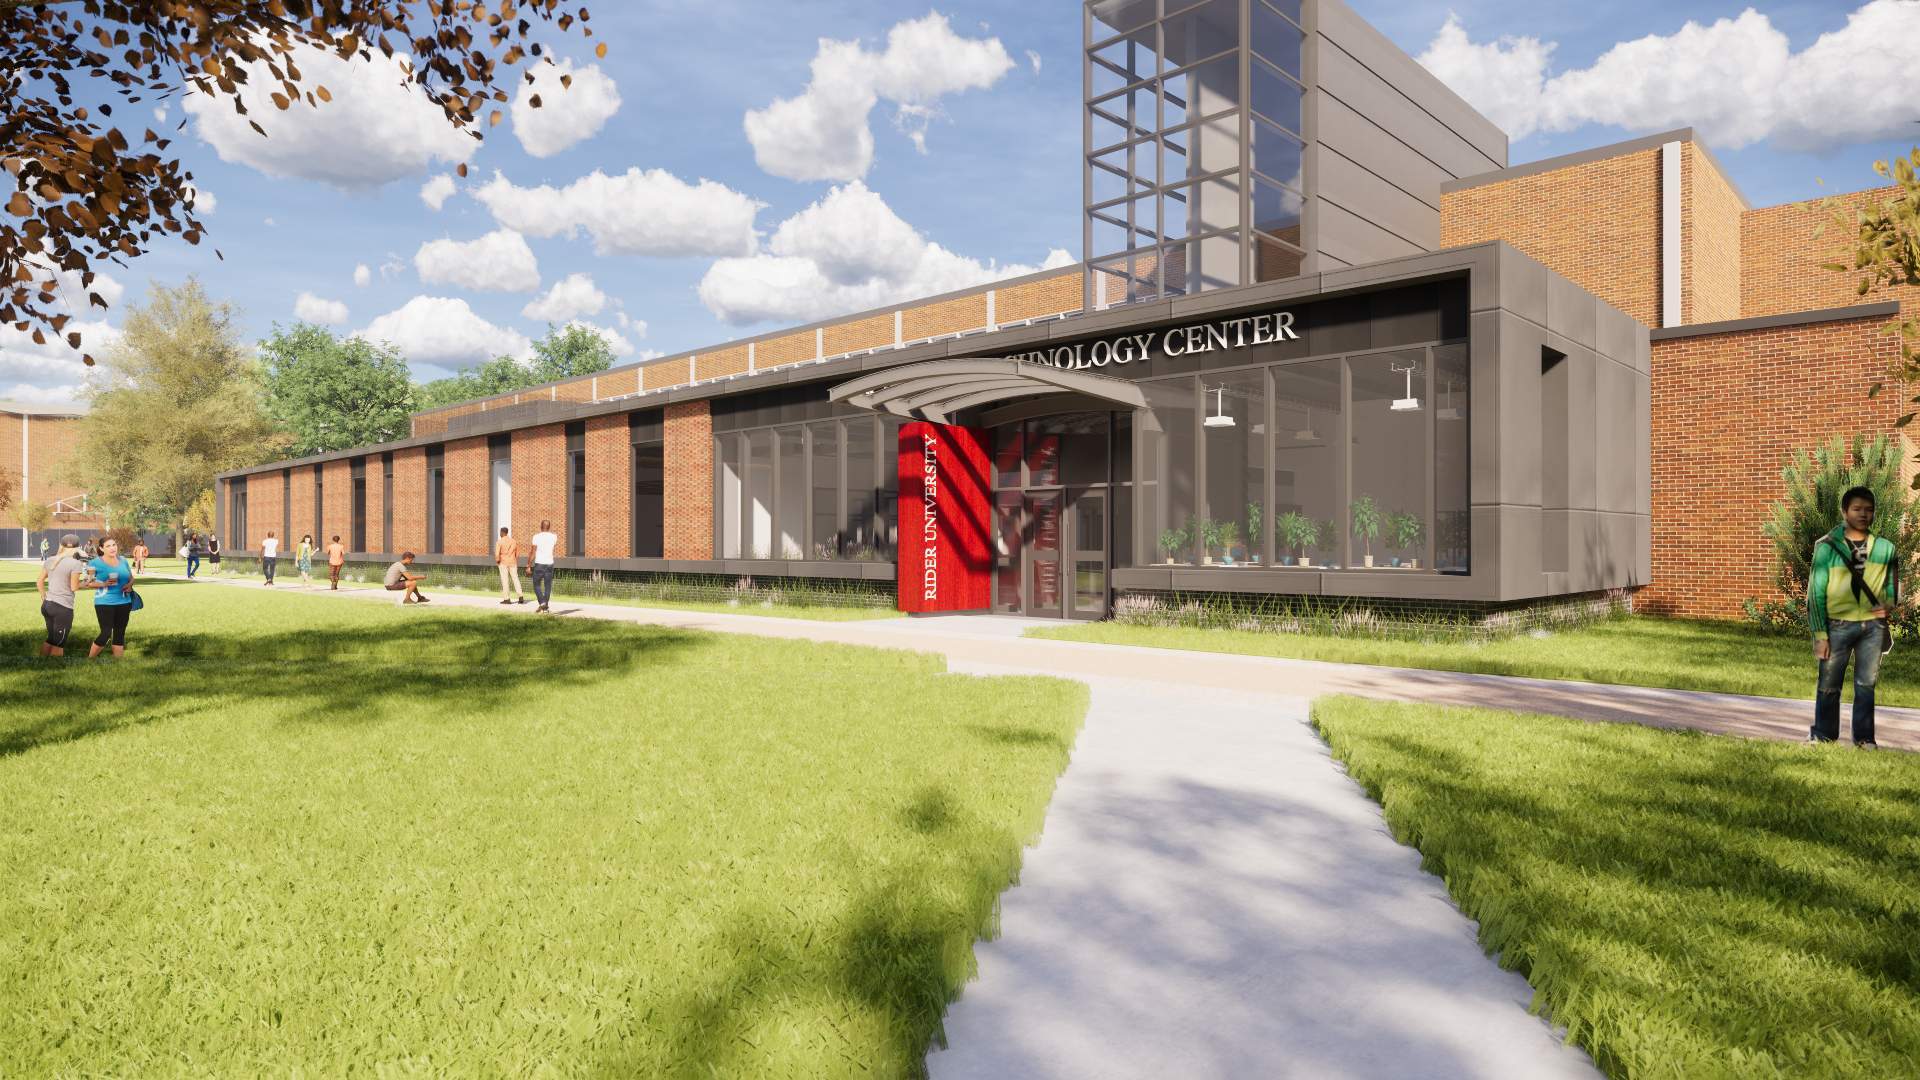 Conceptual rendering of Science and Technology Center